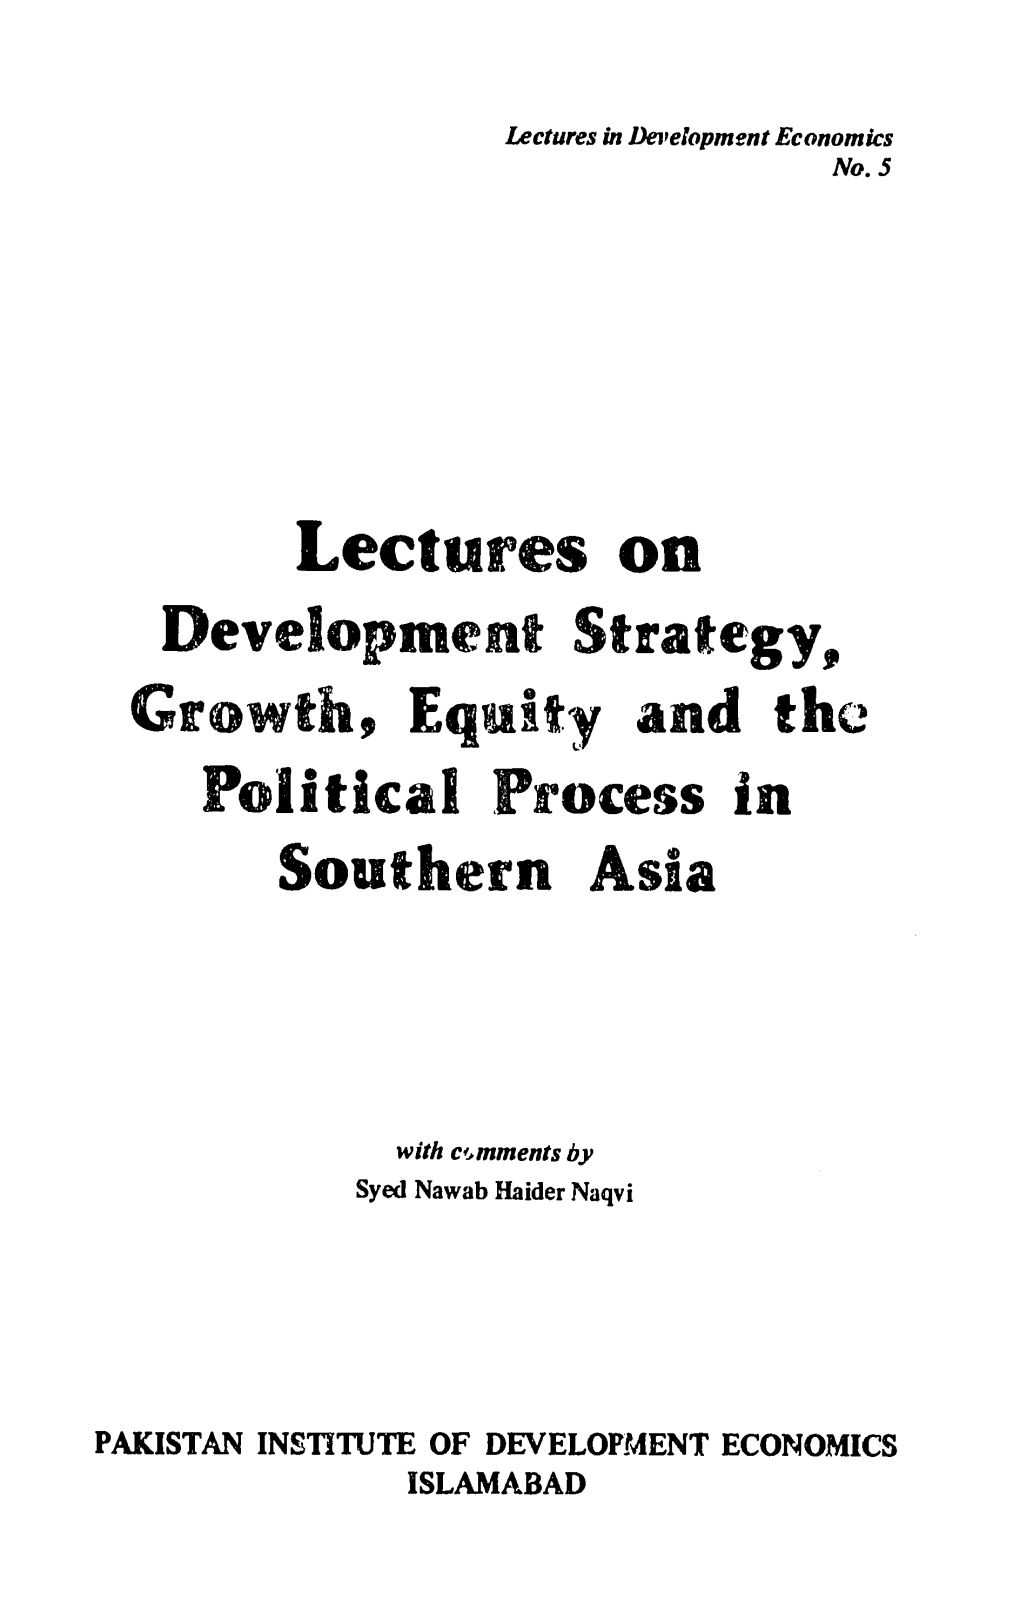 Lectures on Development Strategy, Growth, Equity and the Political Process in Southern Asia